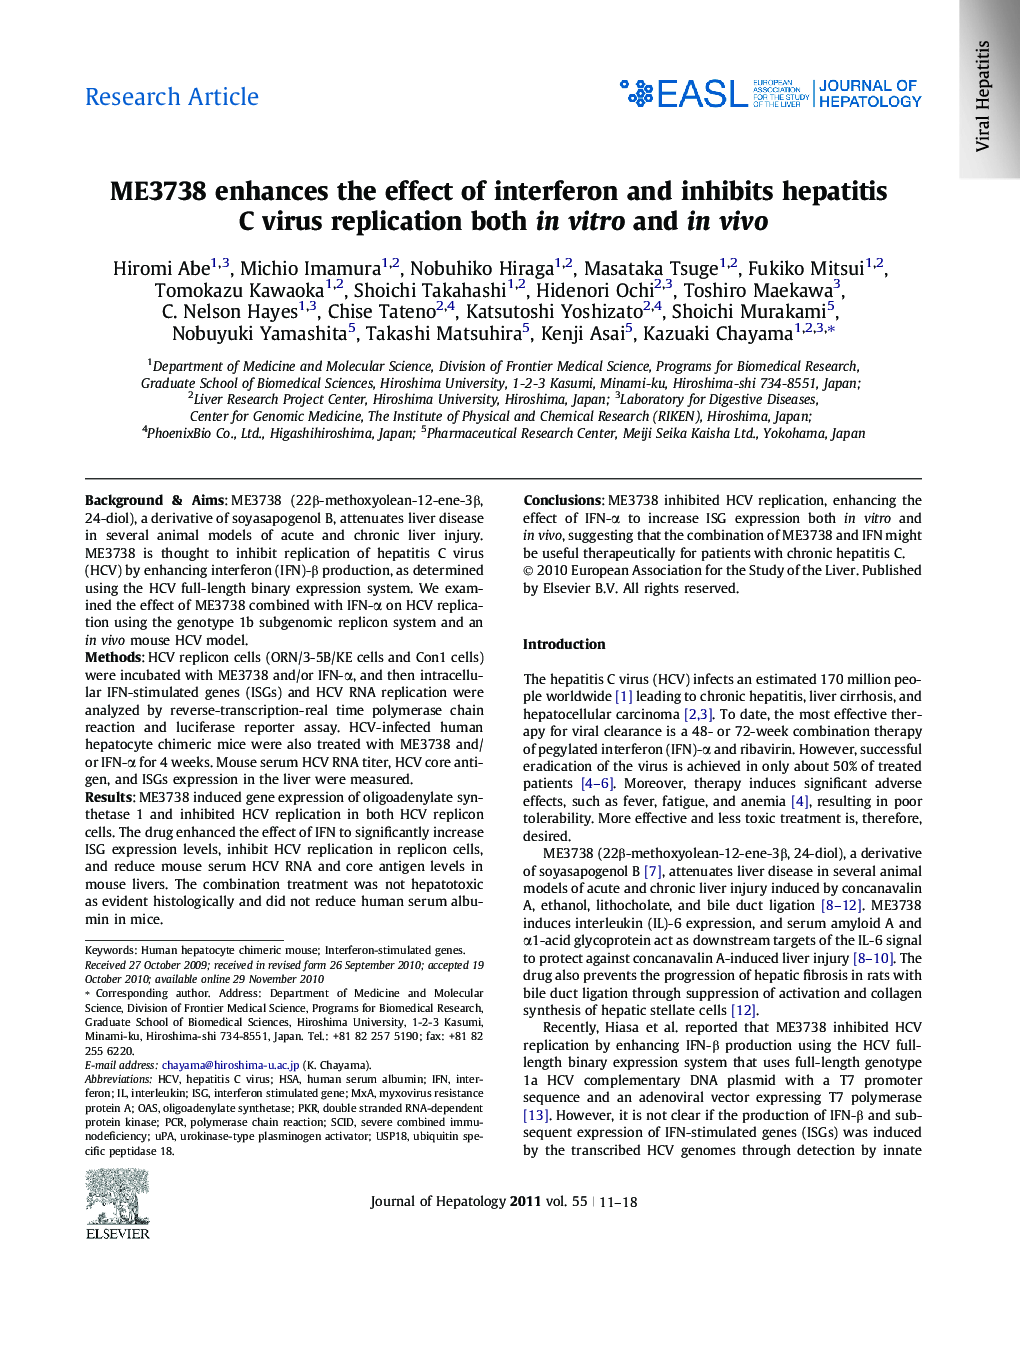 Research ArticleME3738 enhances the effect of interferon and inhibits hepatitis C virus replication both in vitro and in vivo